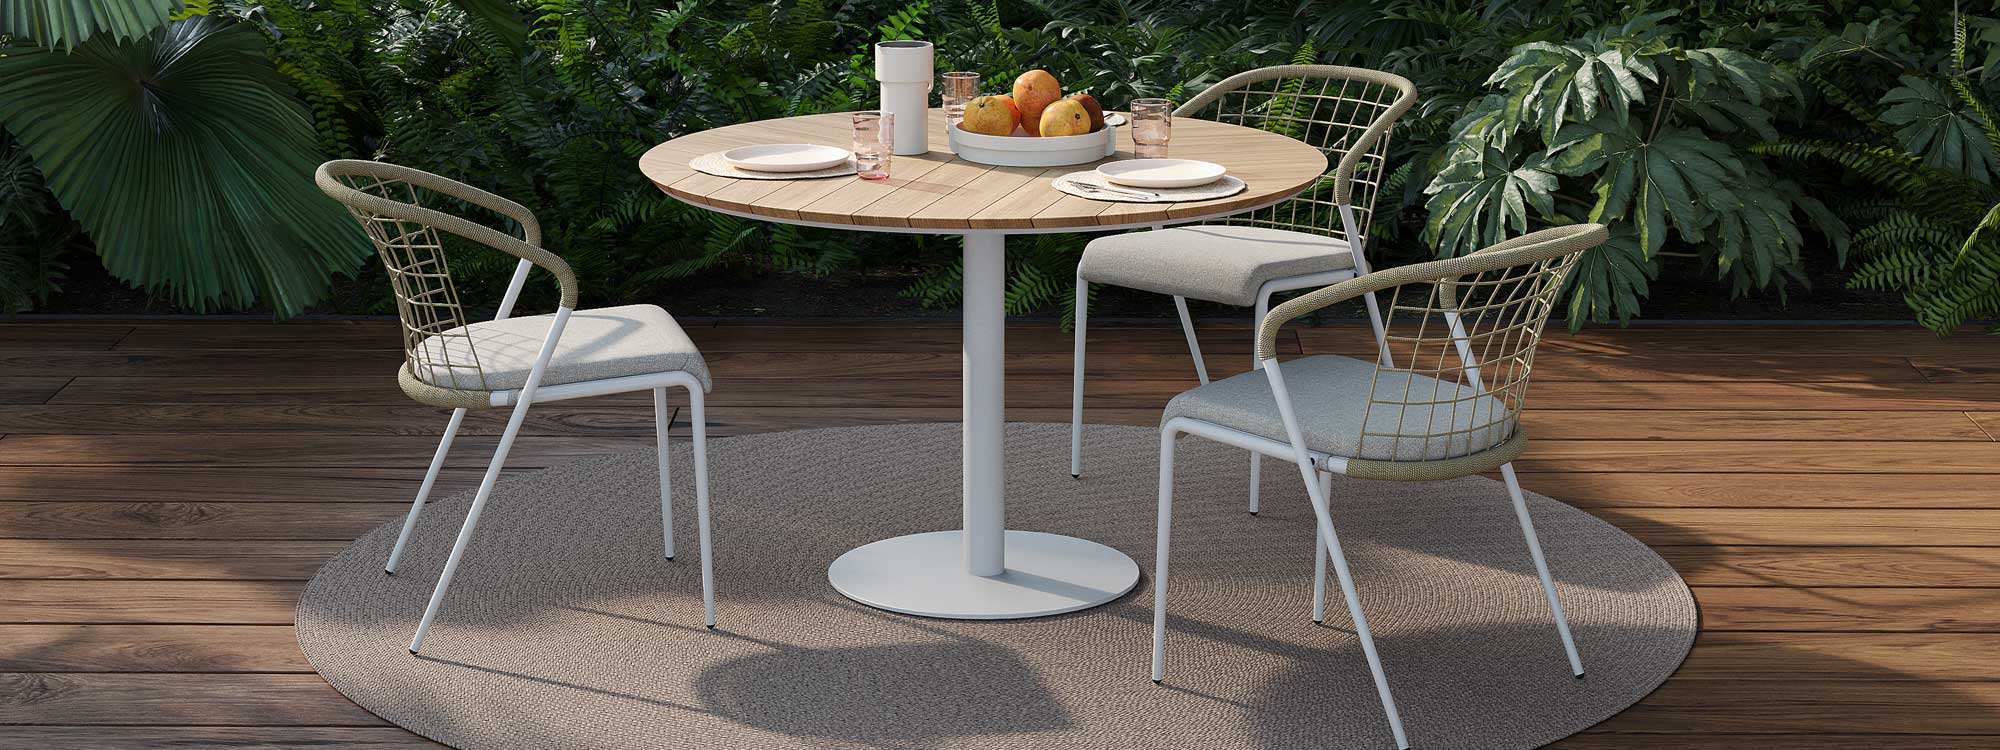 Image of Butler round garden table with white base and teak top and Fensi modern garden chairs by Royal Botania